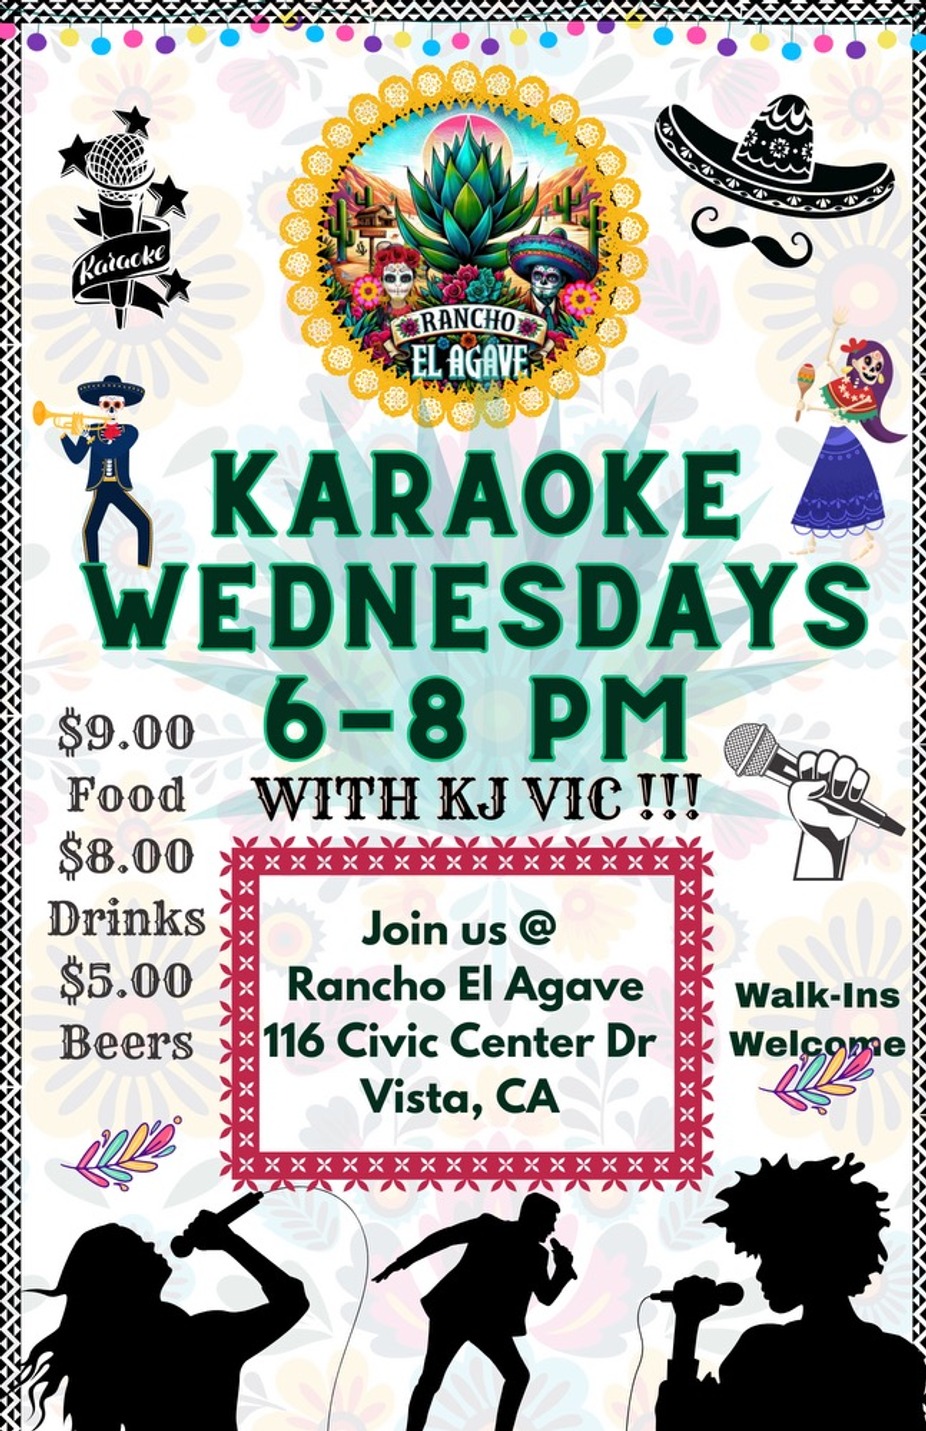 Karaoke 🎤 Tonight with KJ VIC @ REA From 6-8 pm FOOD & DRINK Specials all NIGHT! event photo